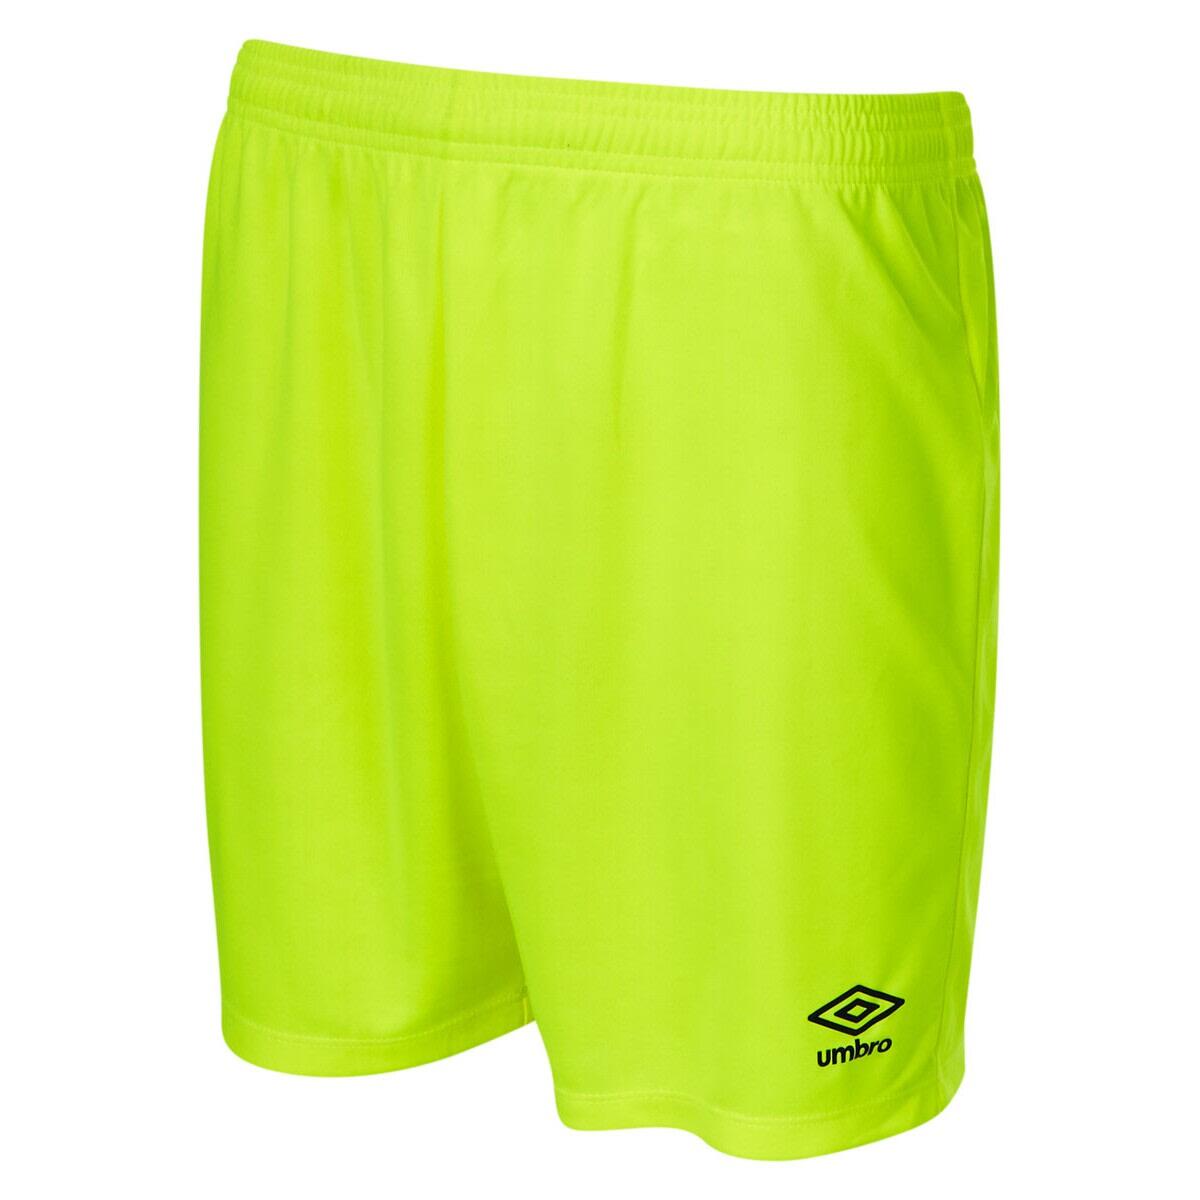 Childrens/Kids Club II Shorts (Safety Yellow/Carbon) 1/2